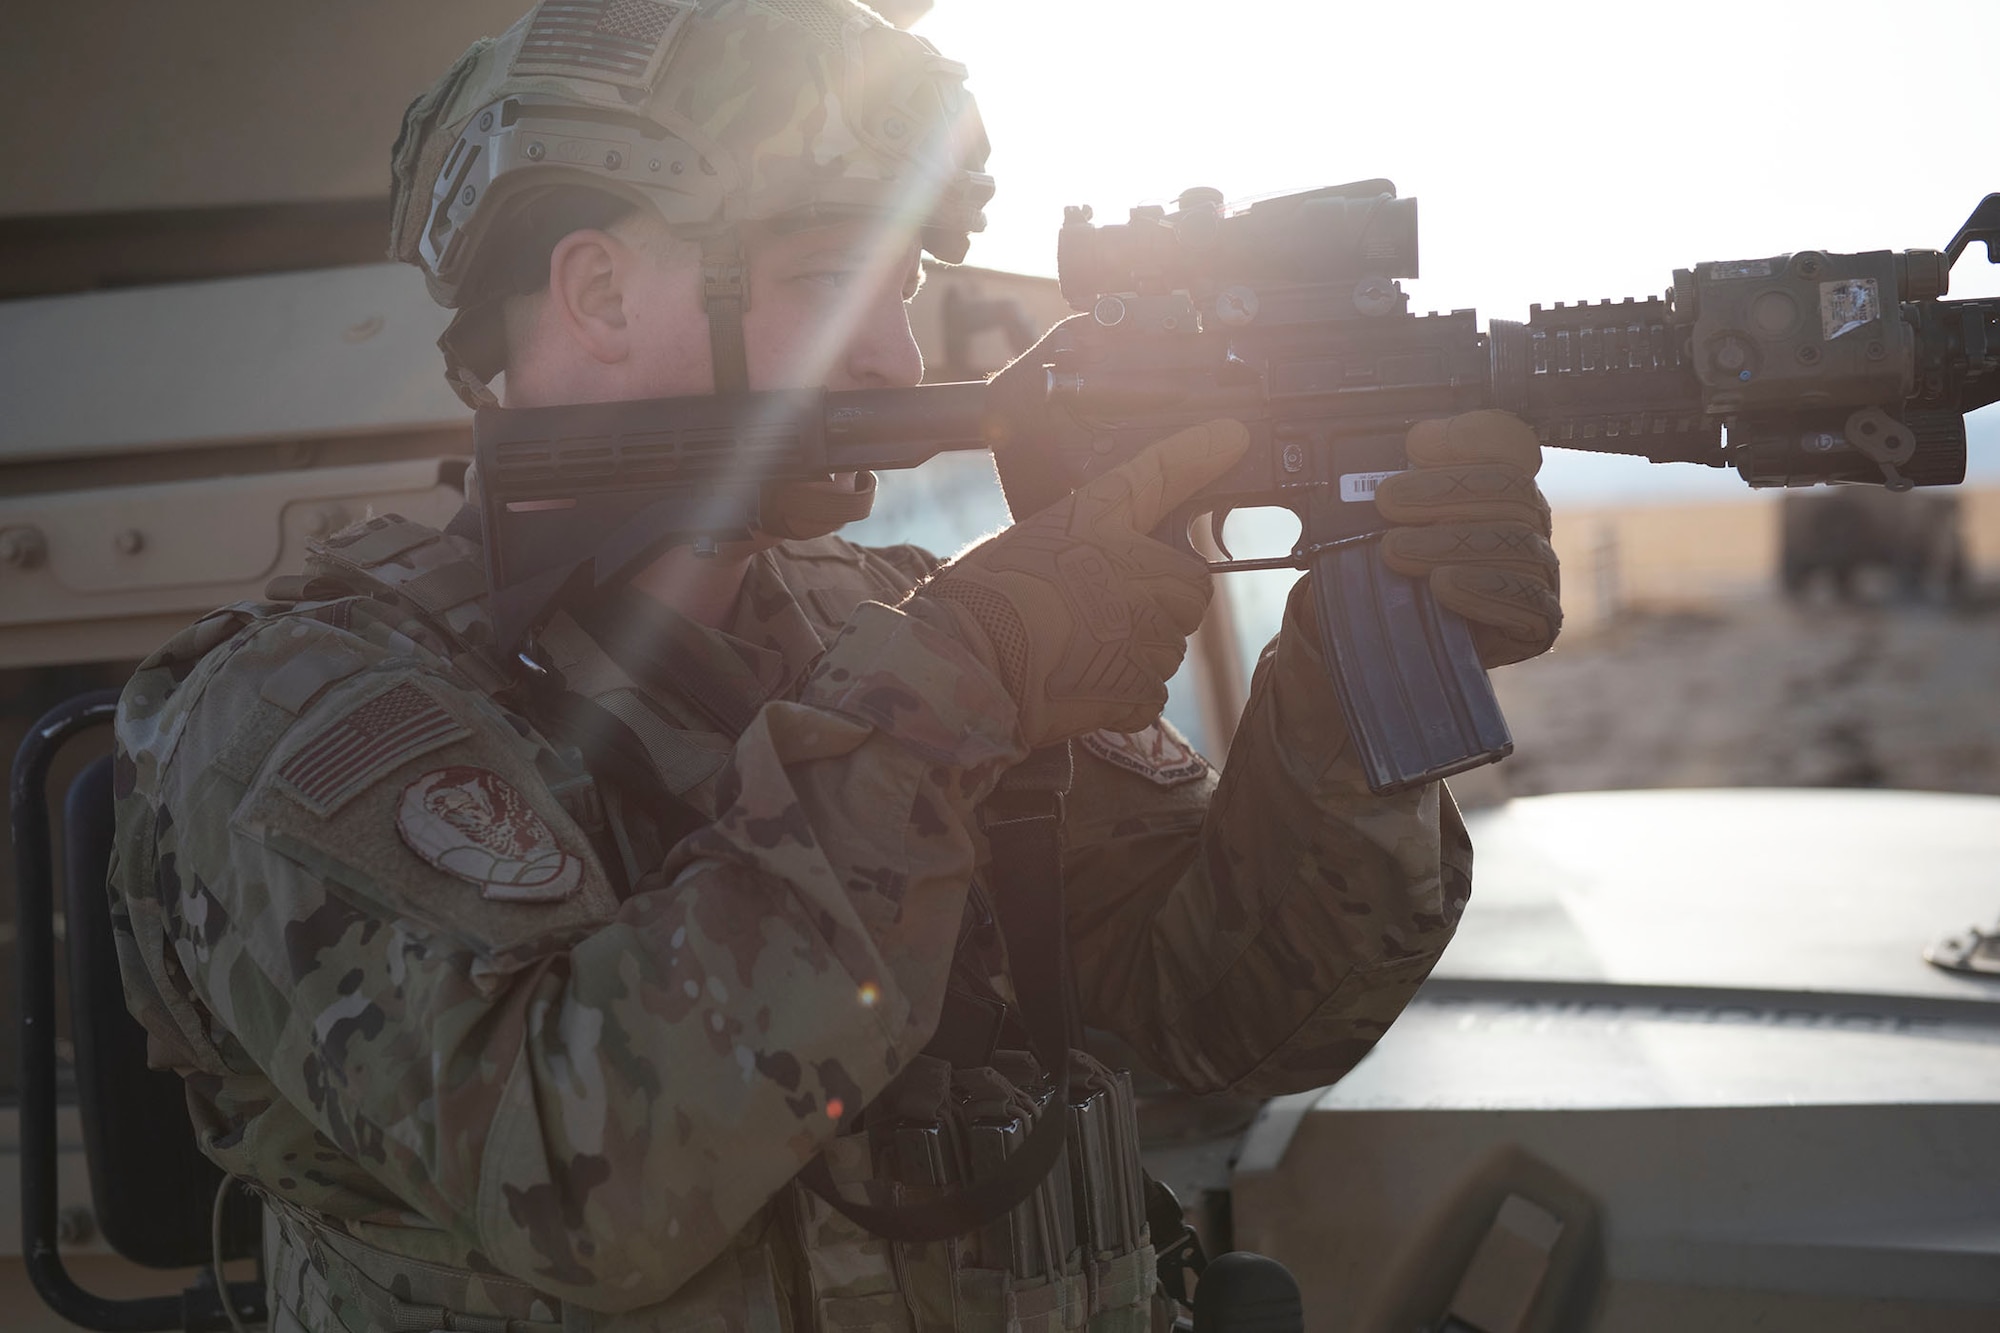 A defender stands with his rifle raised looking towards the right side of the fame. He is pointing down range, sun is shining brightly in the background of the image.